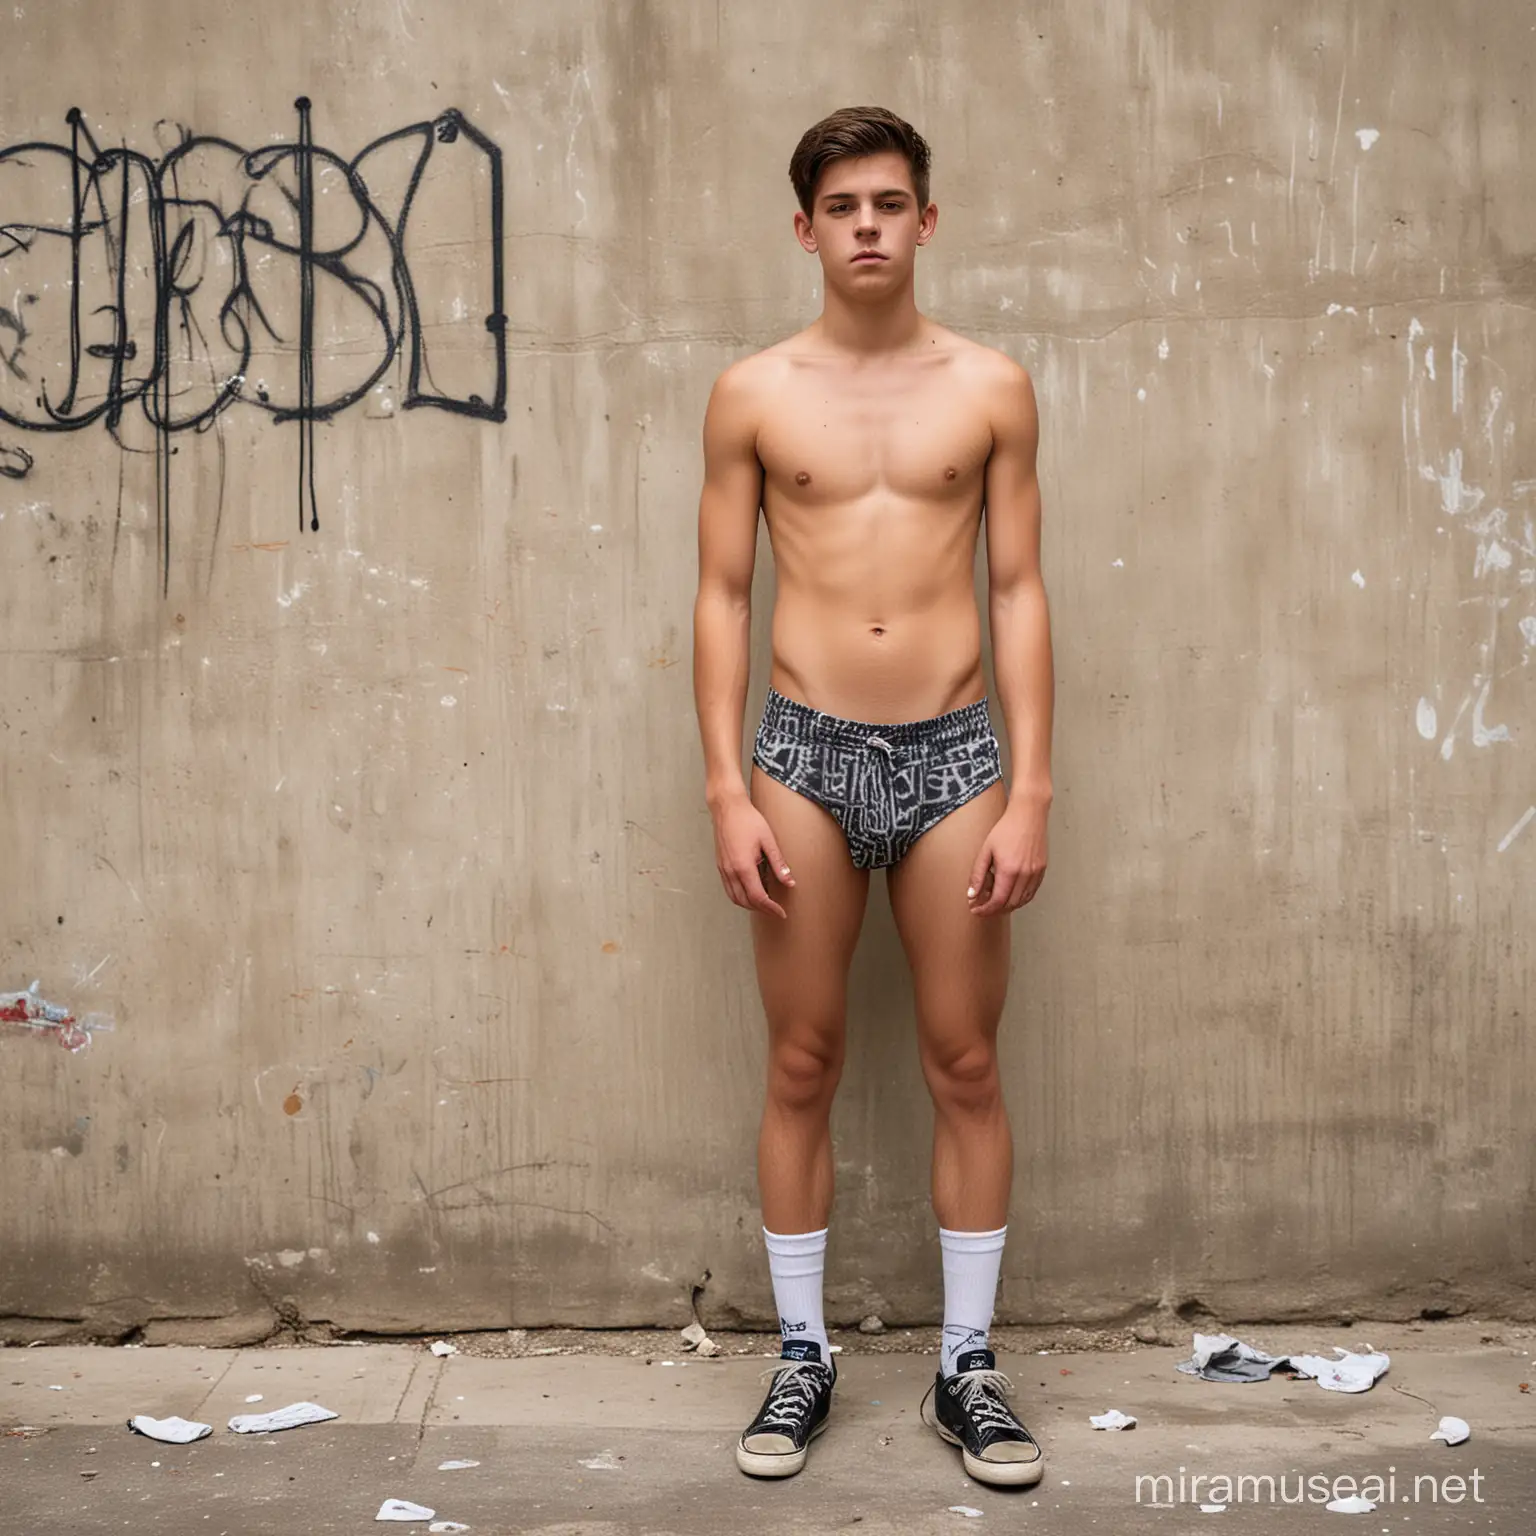 Serious Naked Young Man in Dress Shoes and Socks Against Graffiti Wall